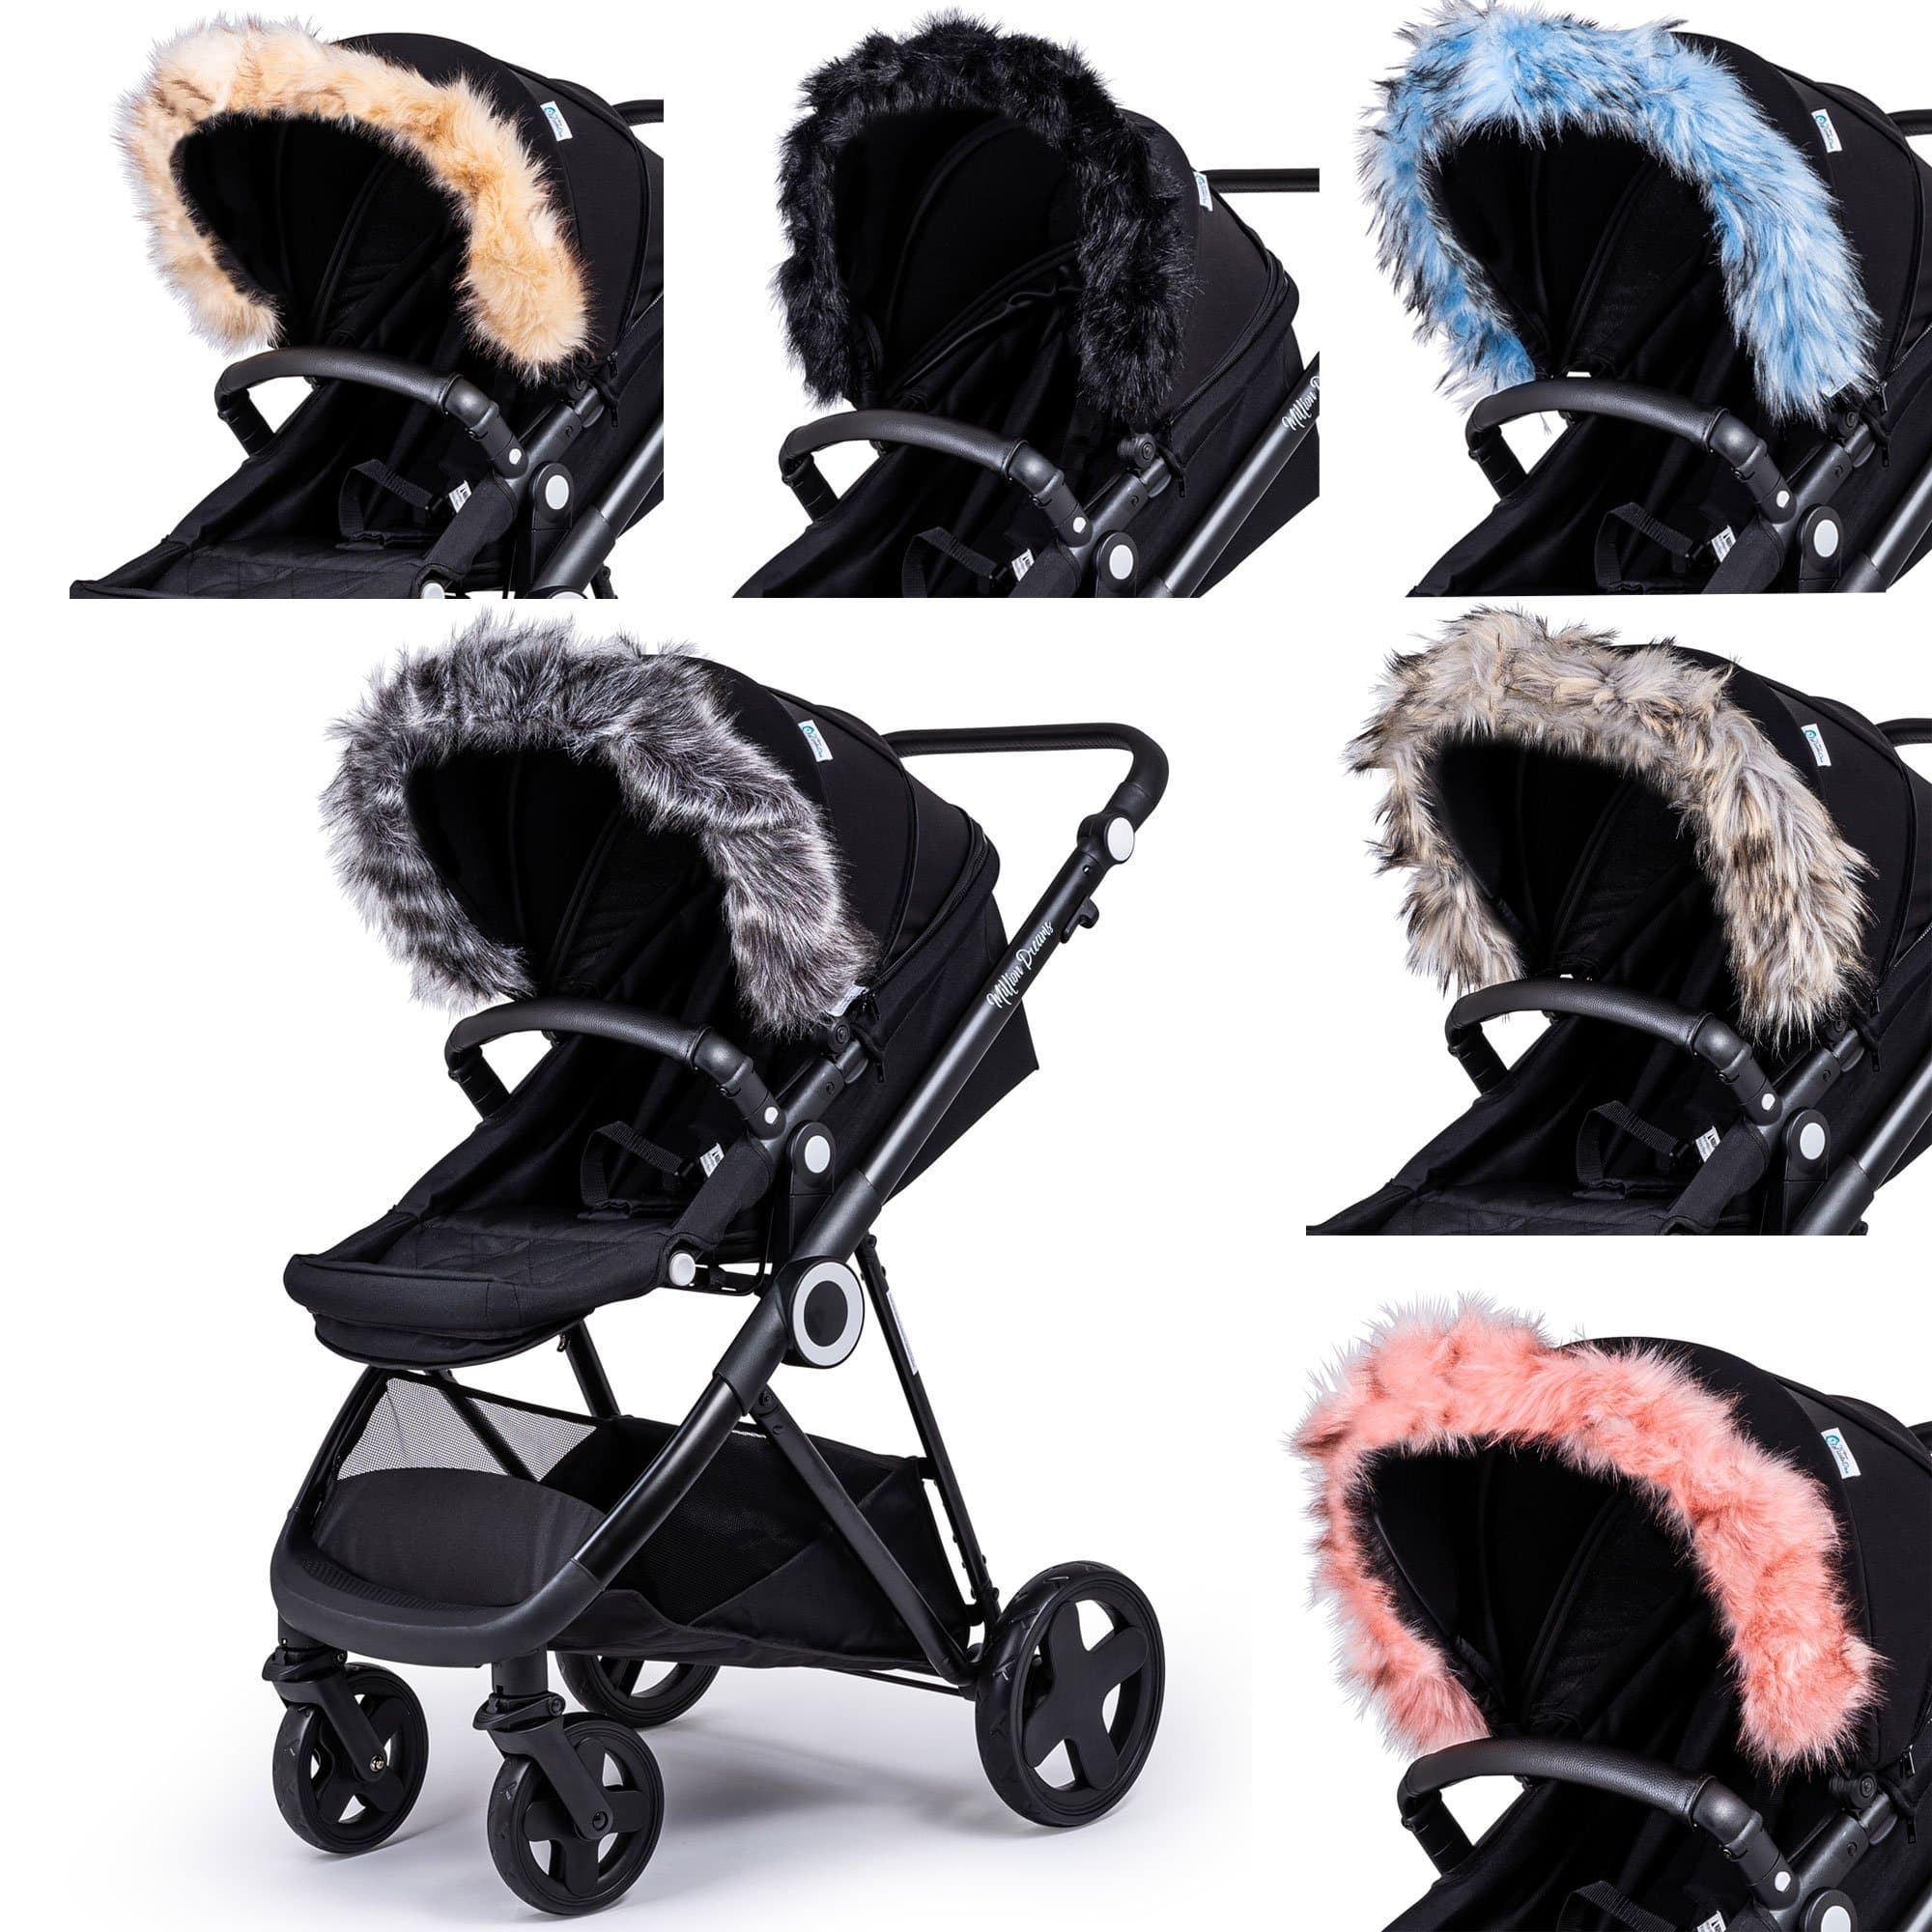 Pram Fur Hood Trim Attachment For Pushchair Compatible with My Child - For Your Little One